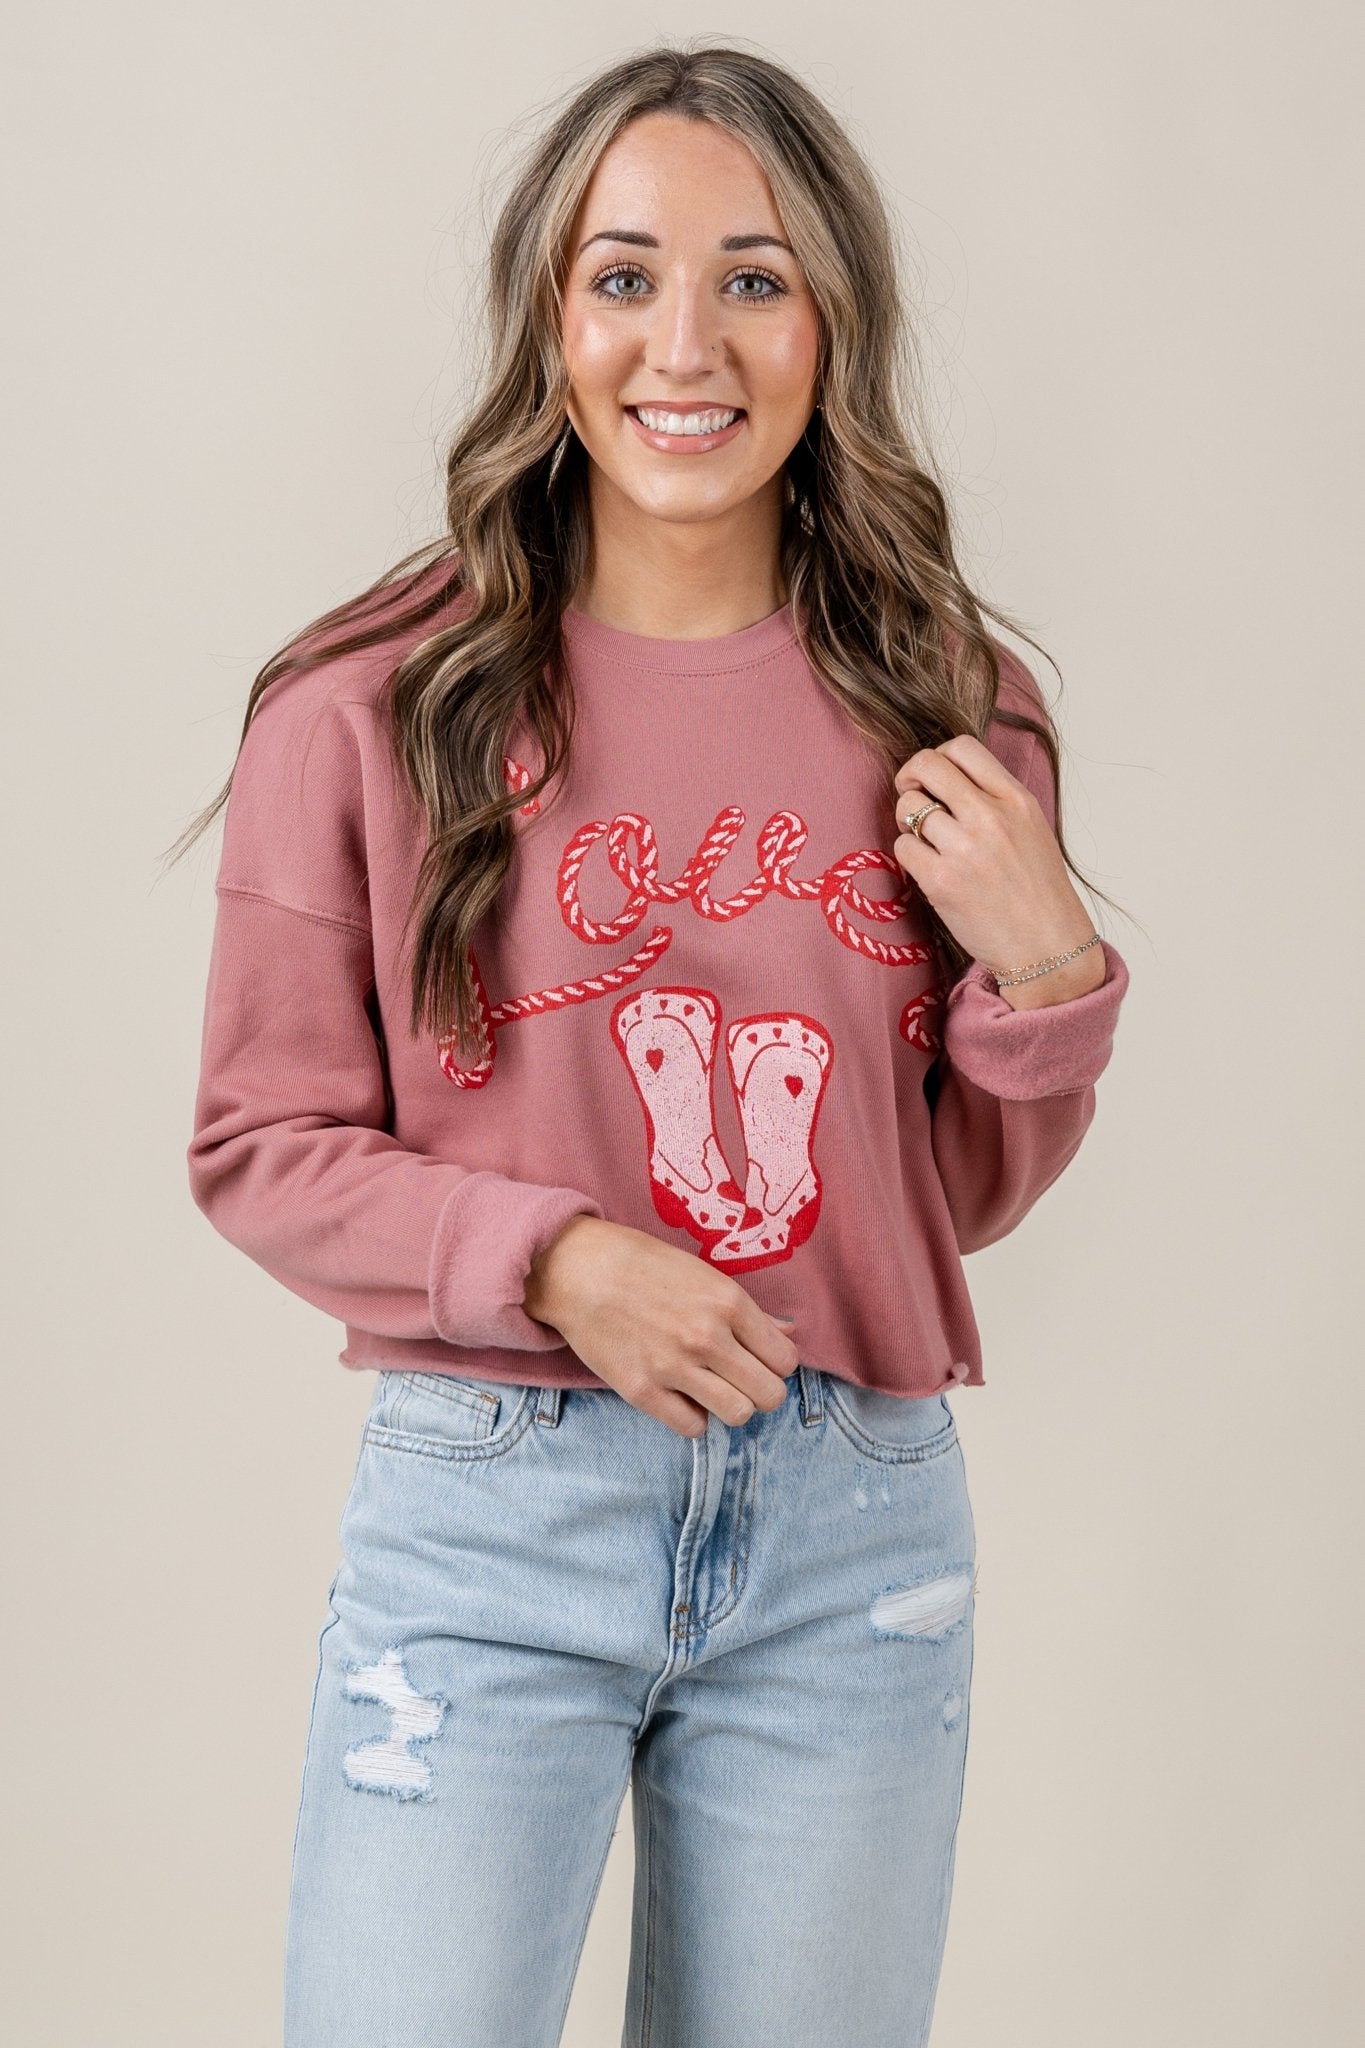 Lover cowboy boot cropped sweatshirt mauve - Trendy Valentine's T-Shirts at Lush Fashion Lounge Boutique in Oklahoma City